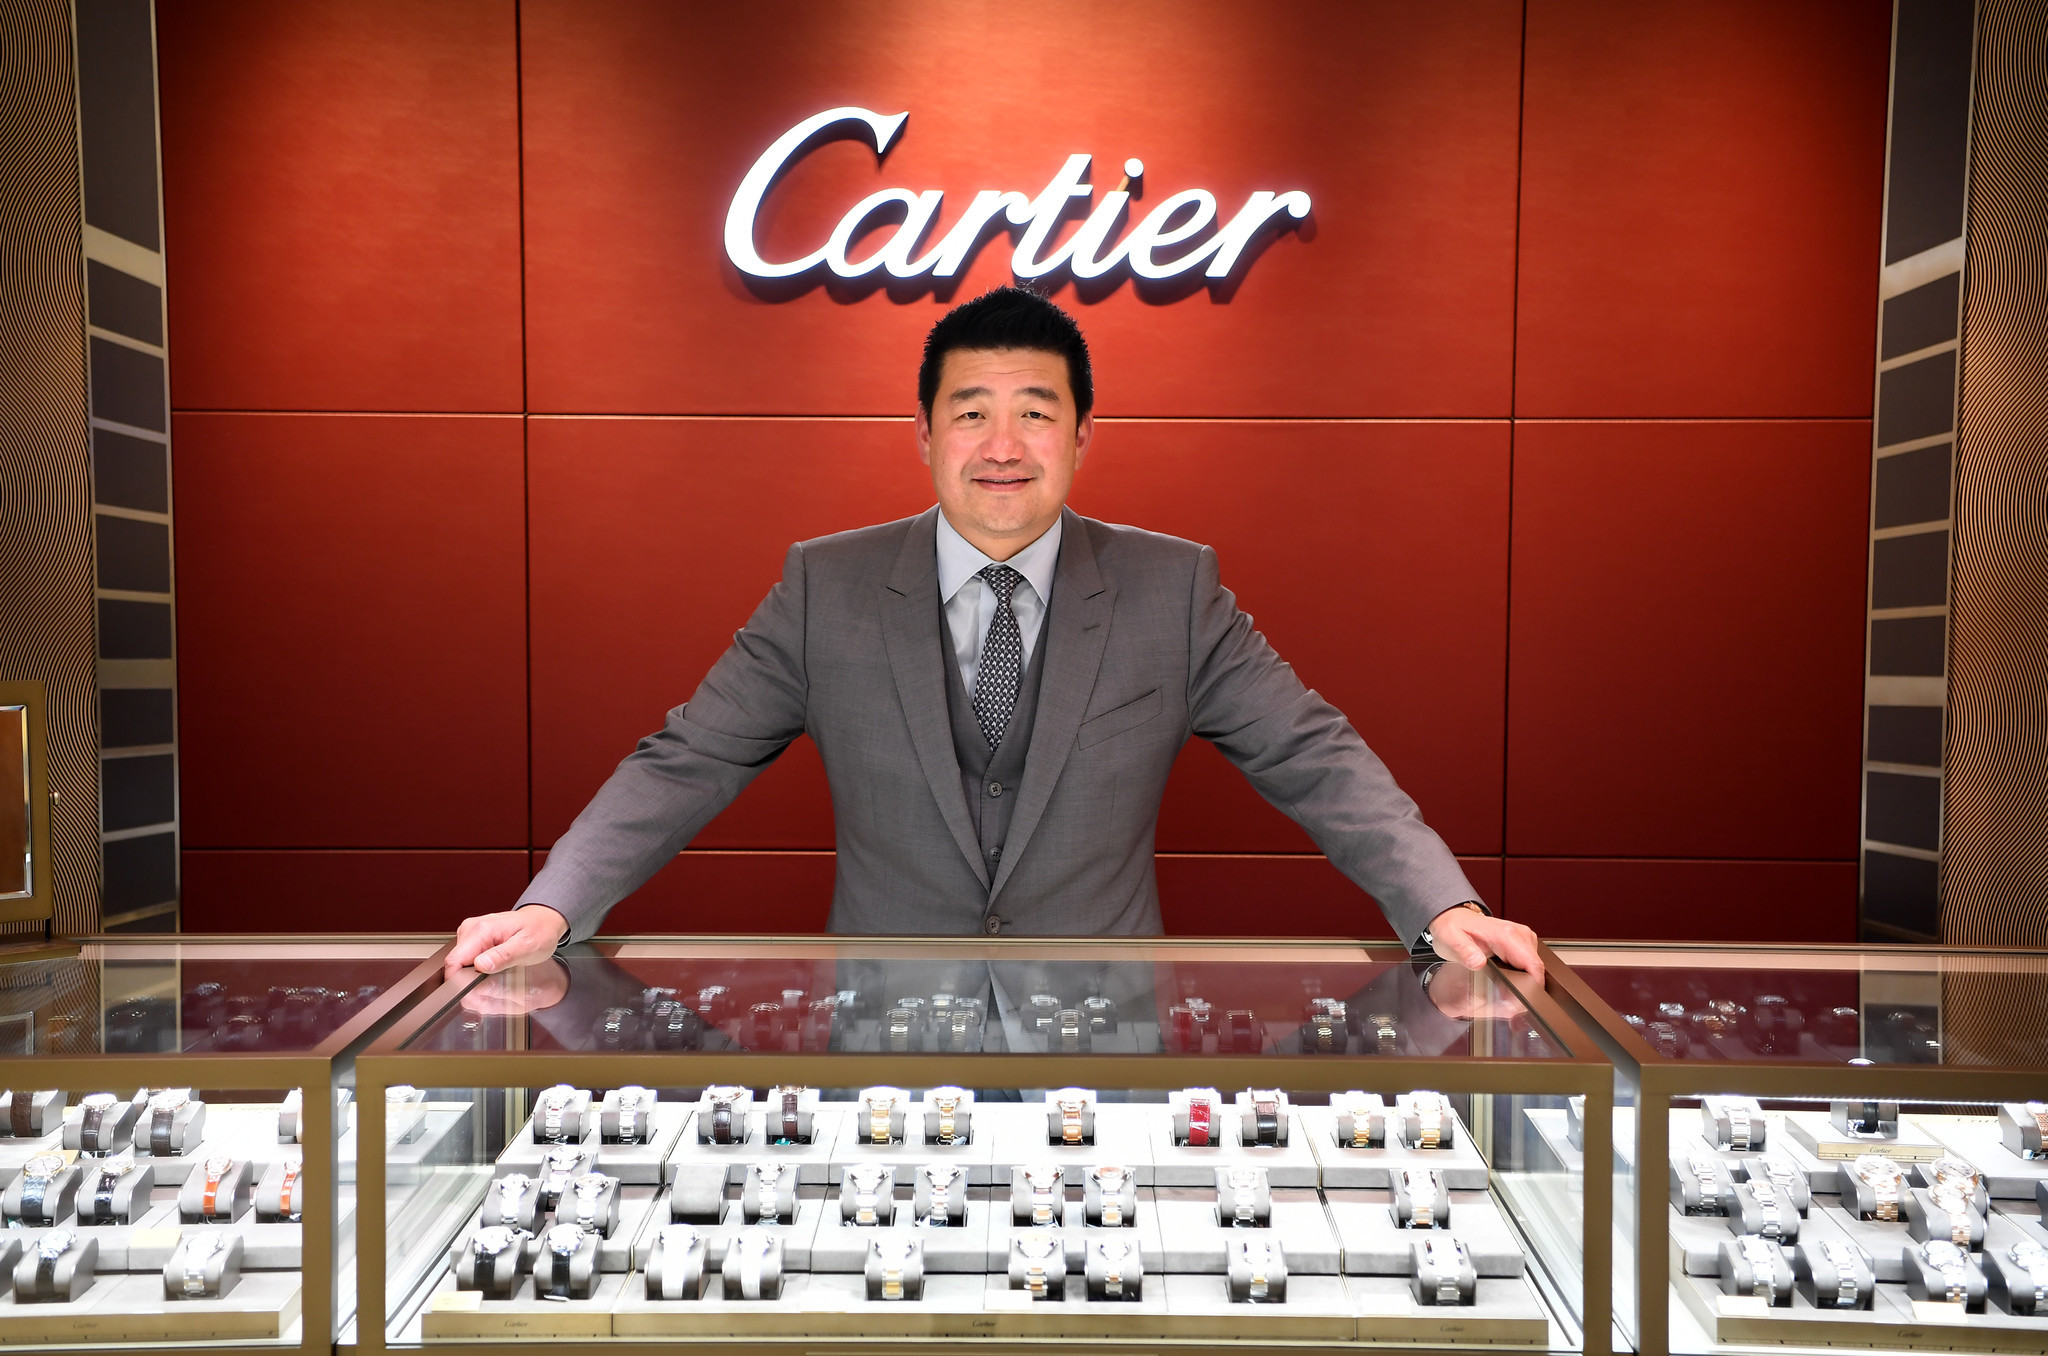 Timepiece and jewelry entrepreneur David Lee is seen at his store in Walnut.